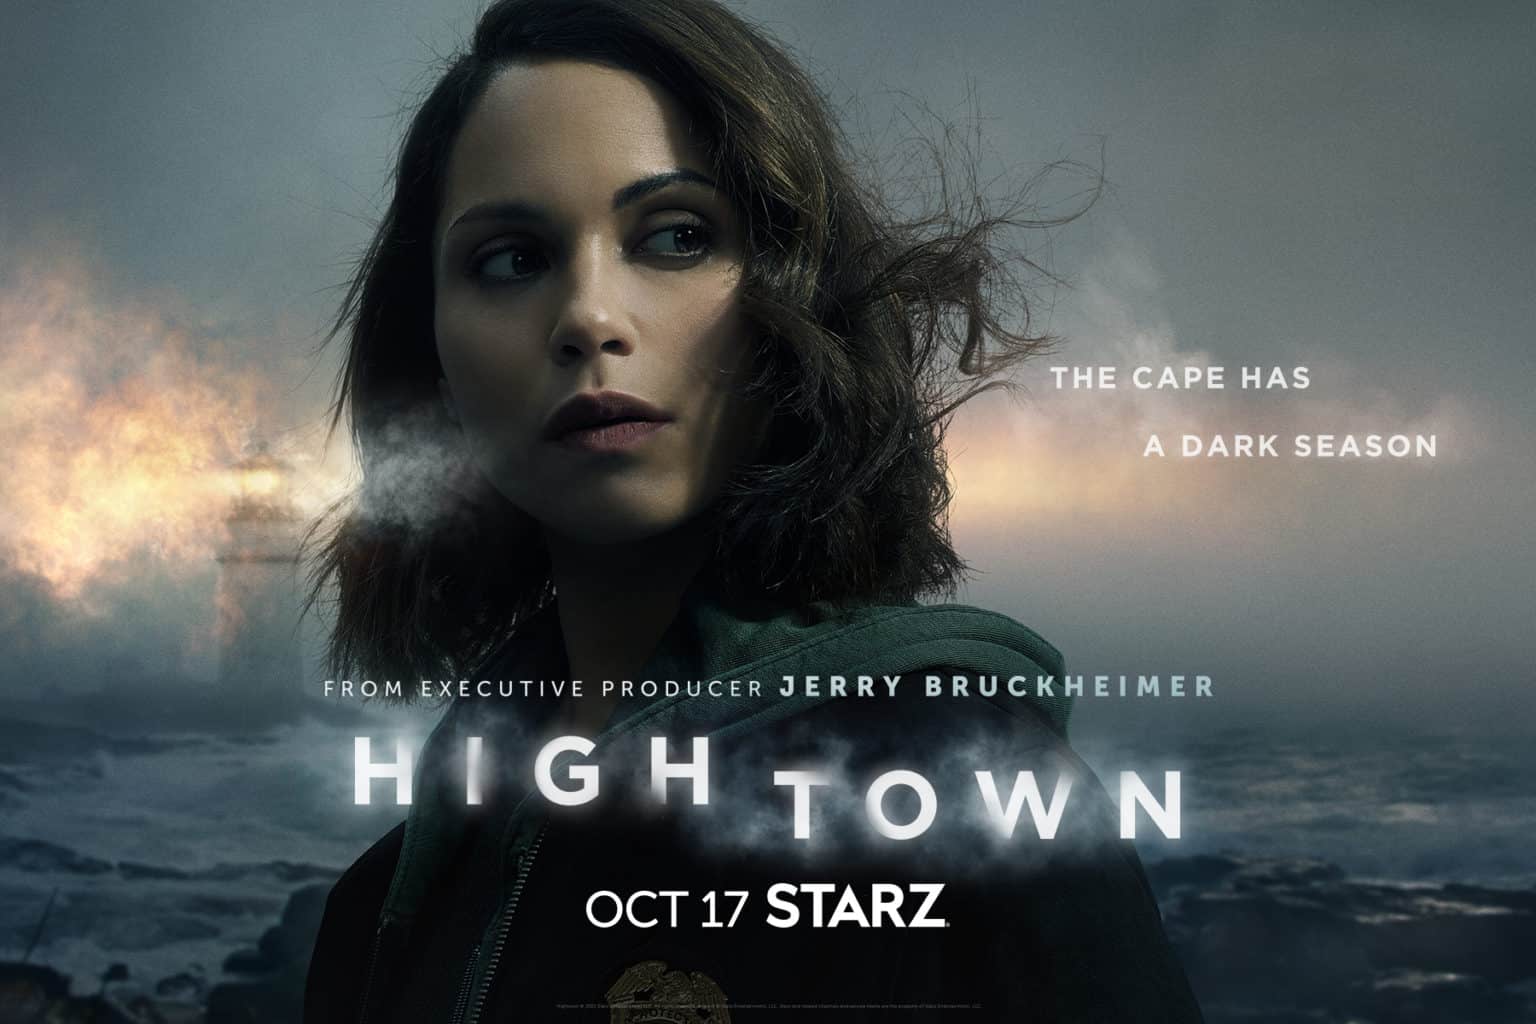 All About the Latest Season of “Hightown” BuddyTV